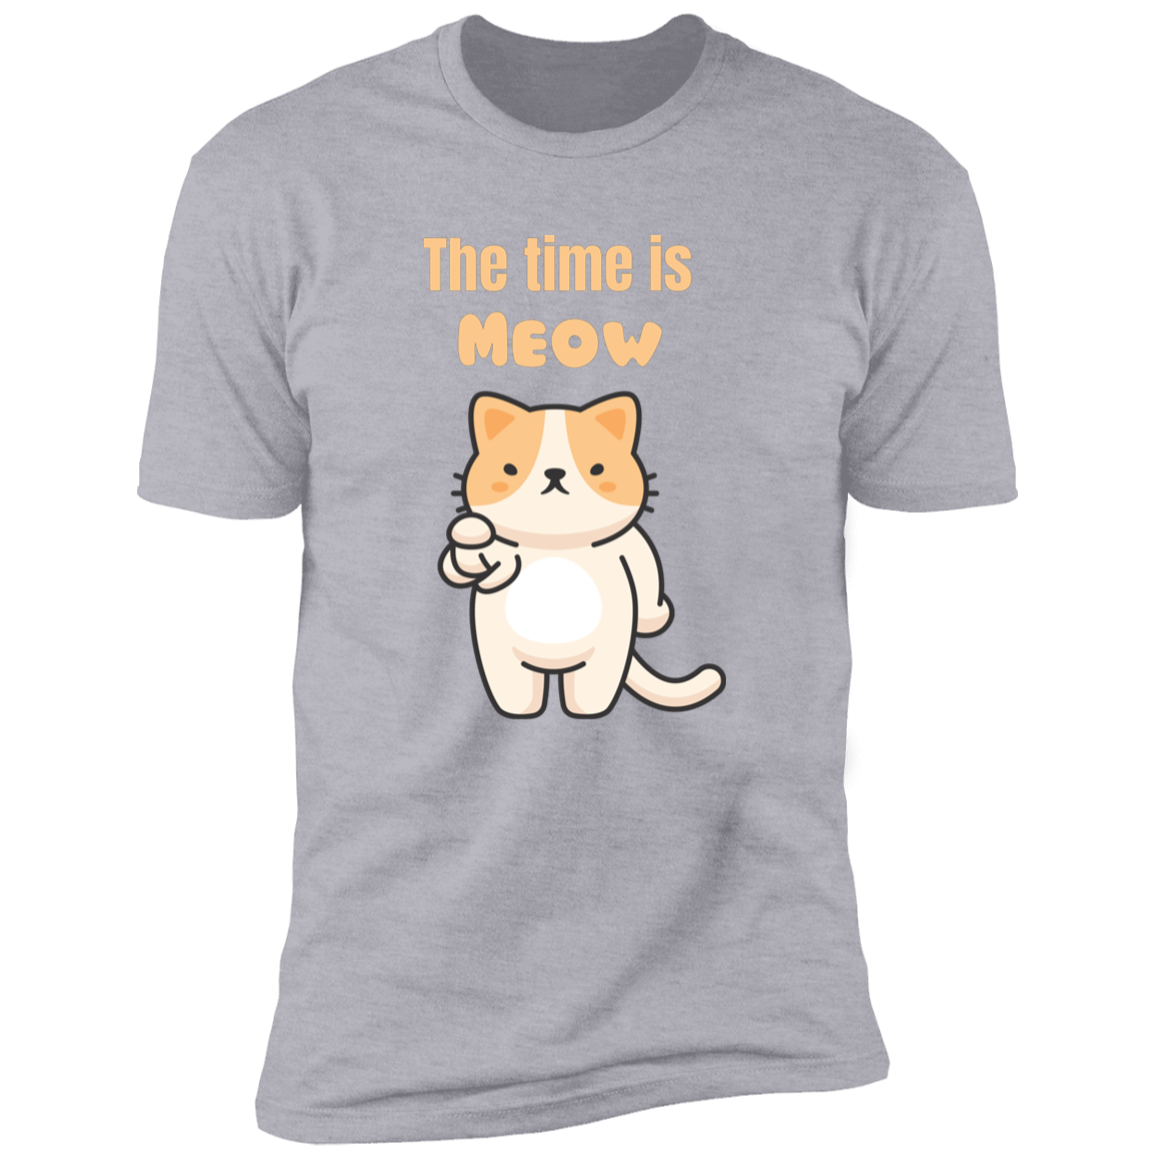 The Time is Meow